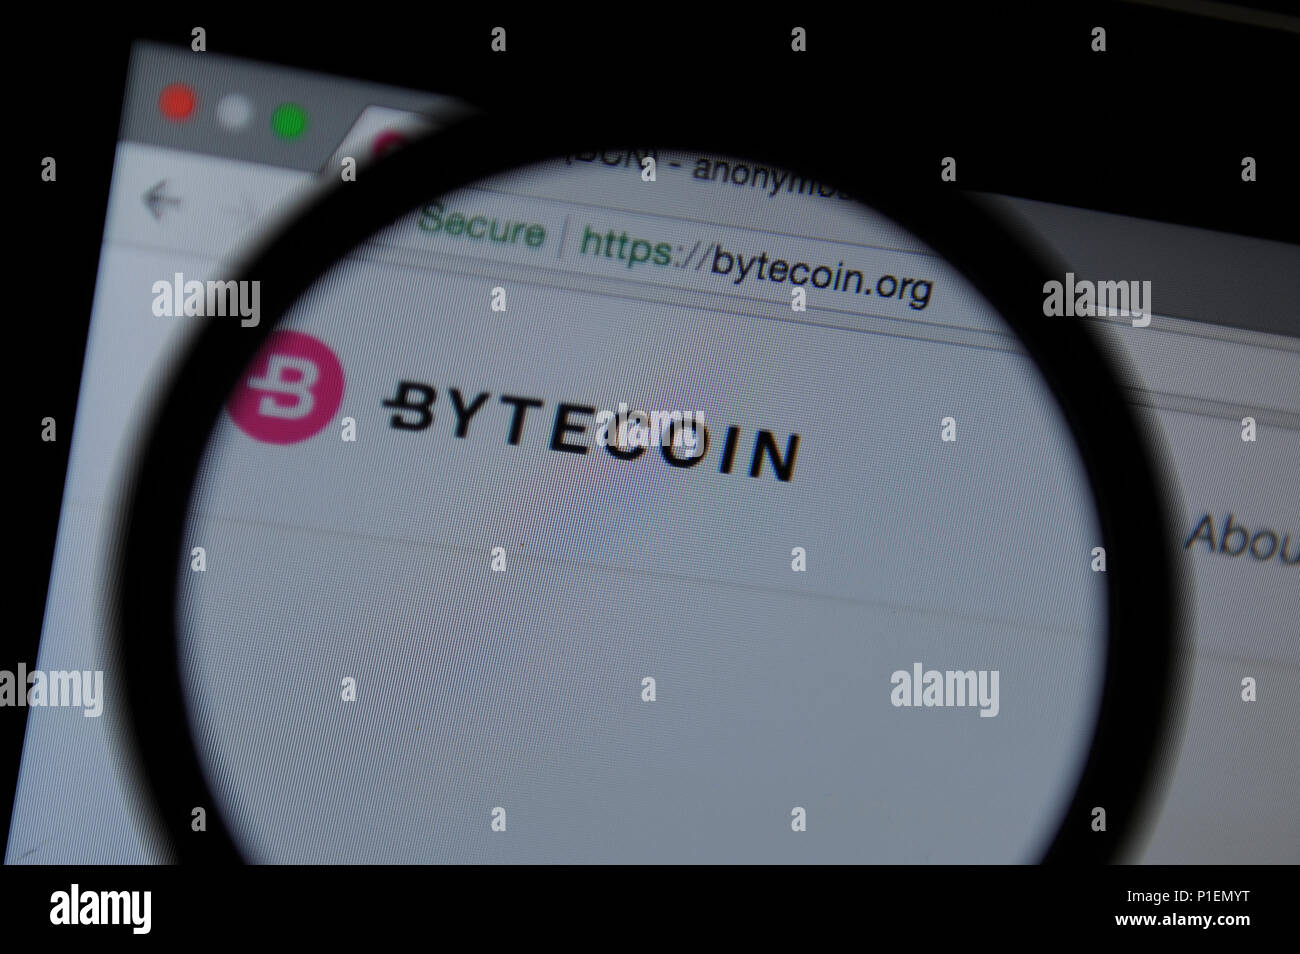 Bytecoin cryptocurrency website seen through a magnifying glass Stock Photo